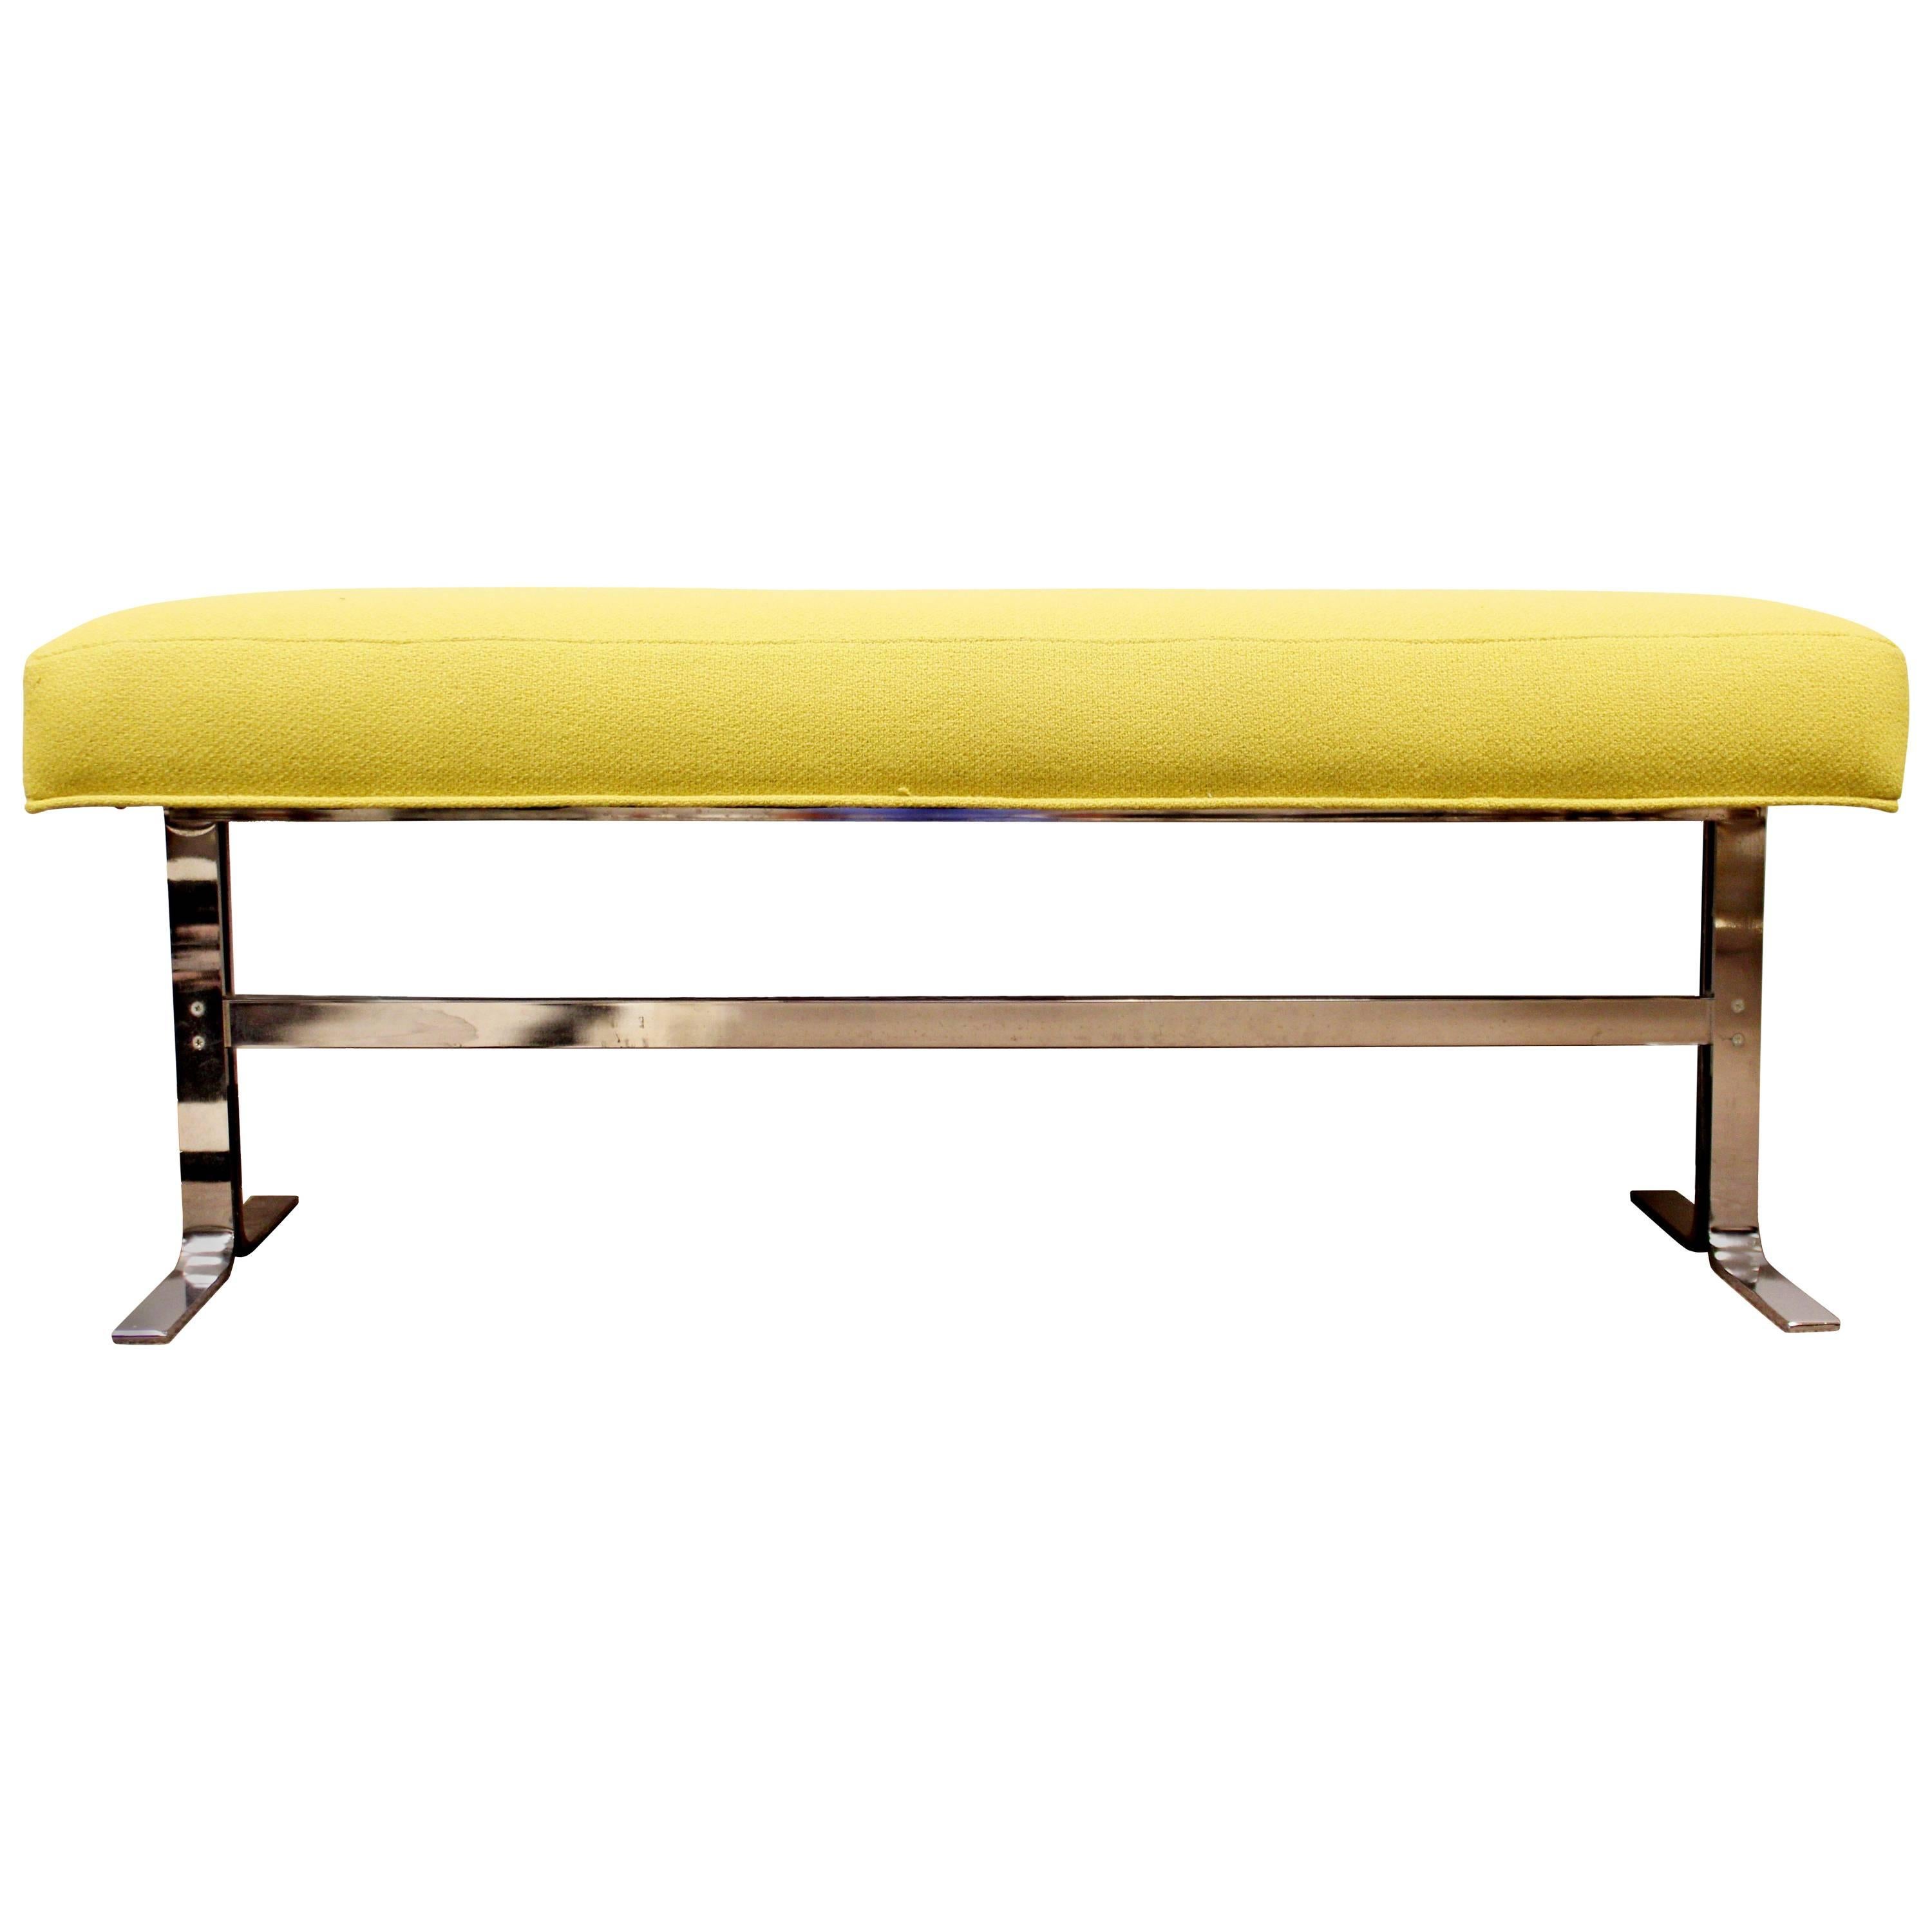 Pace Polished Chrome Yellow Bench, circa 1970s